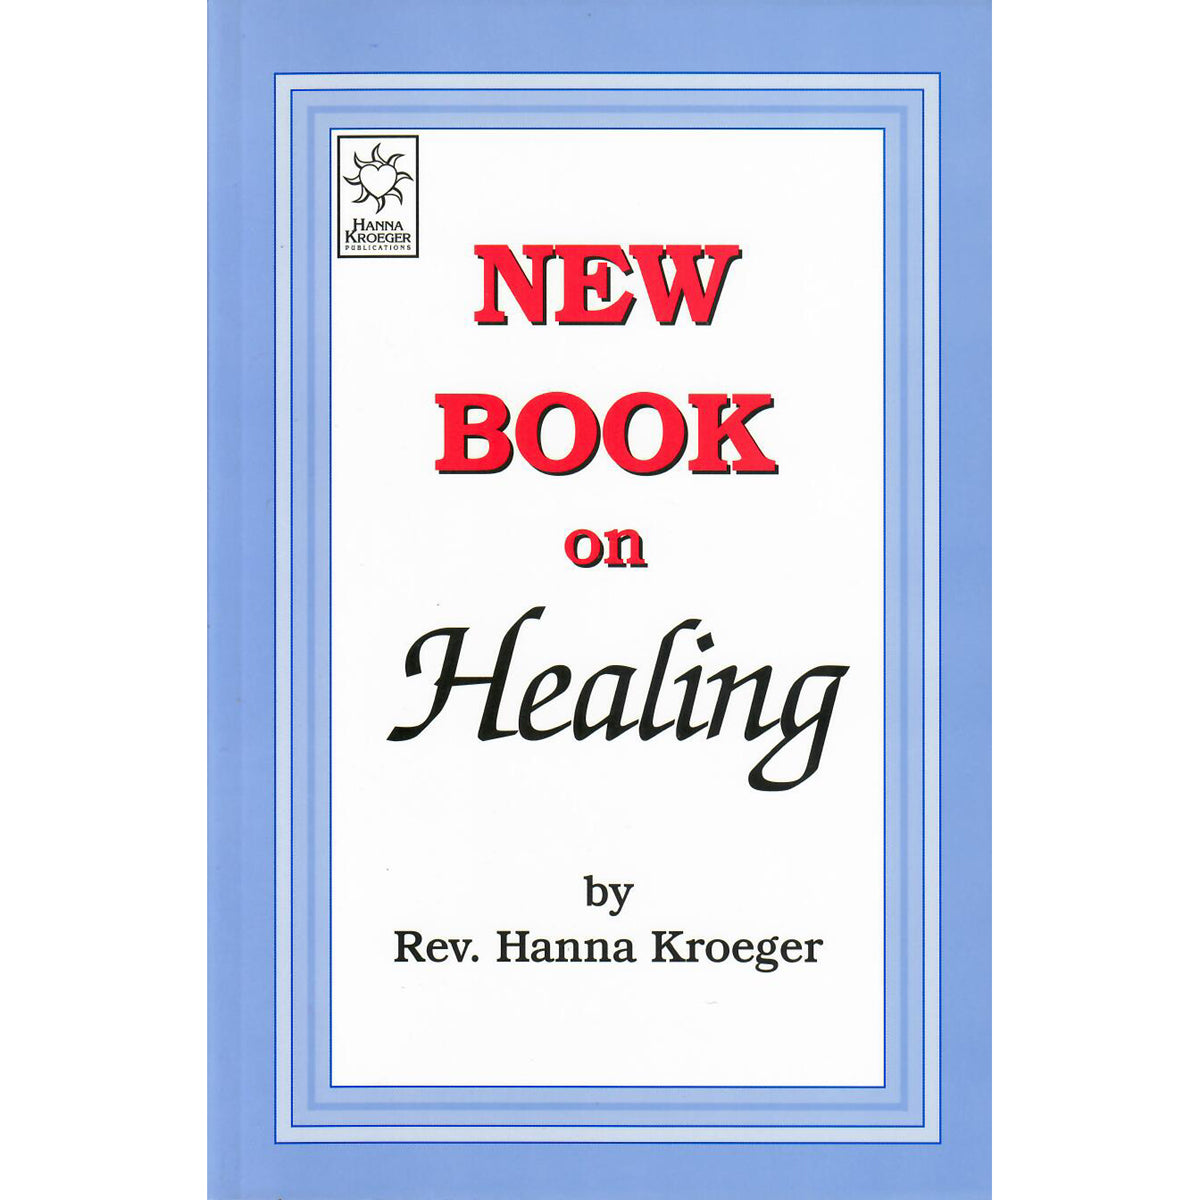 New Book on Healing